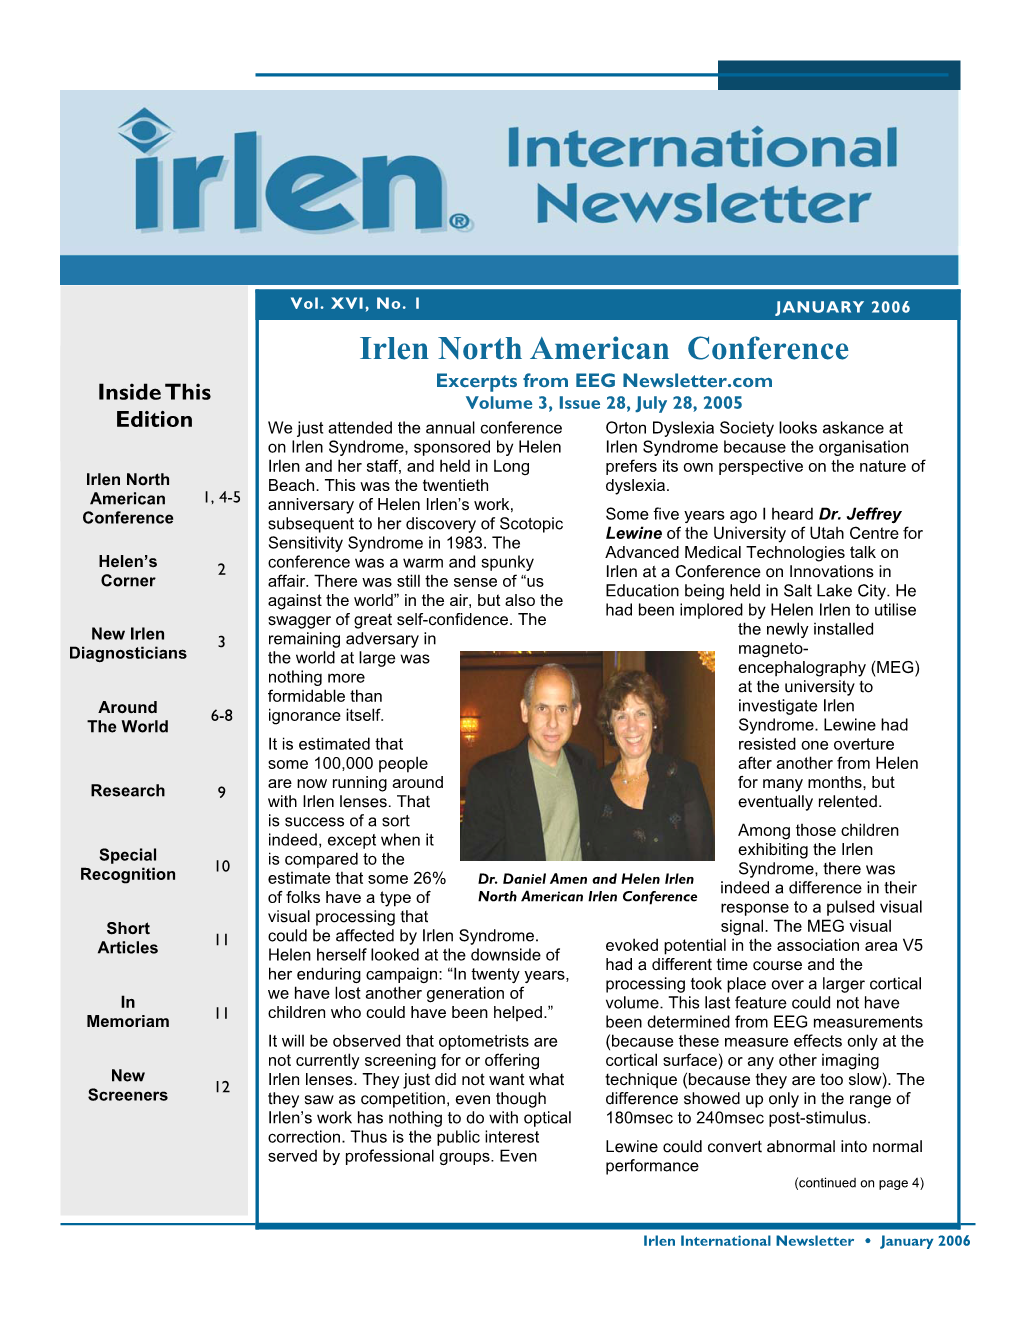 Irlen North American Conference